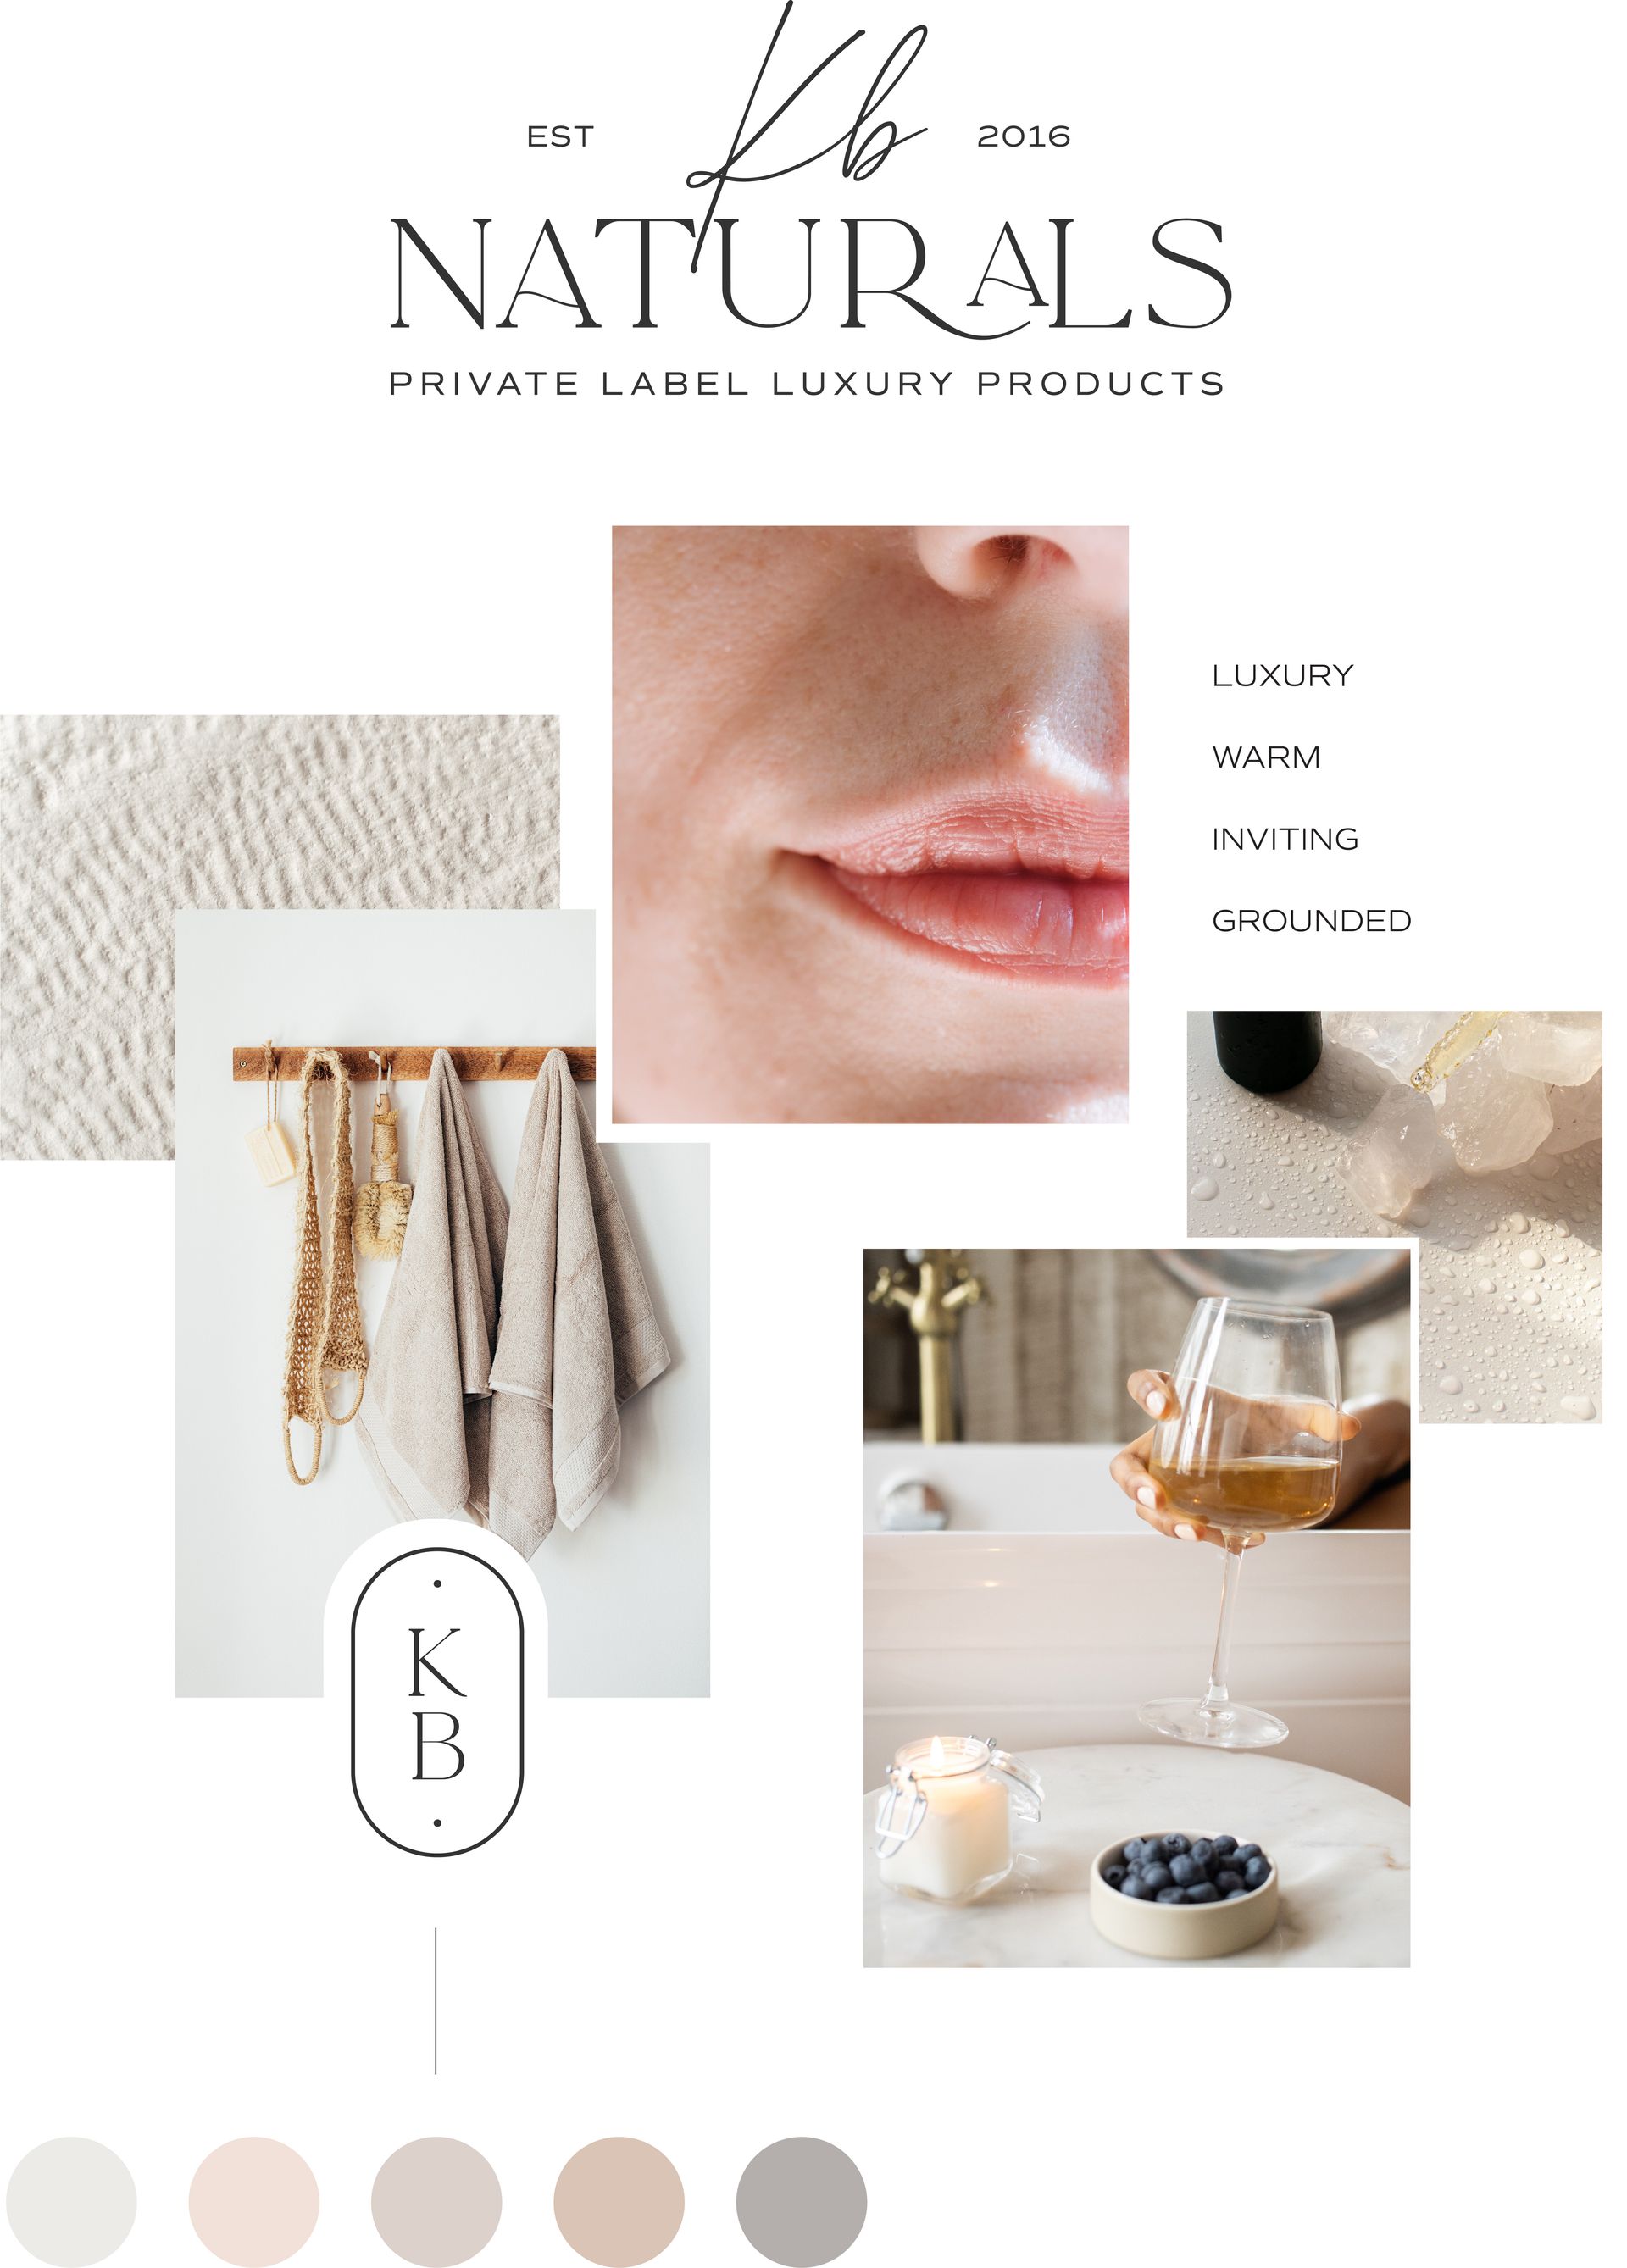 semi-custom brand design for natural private label luxury products